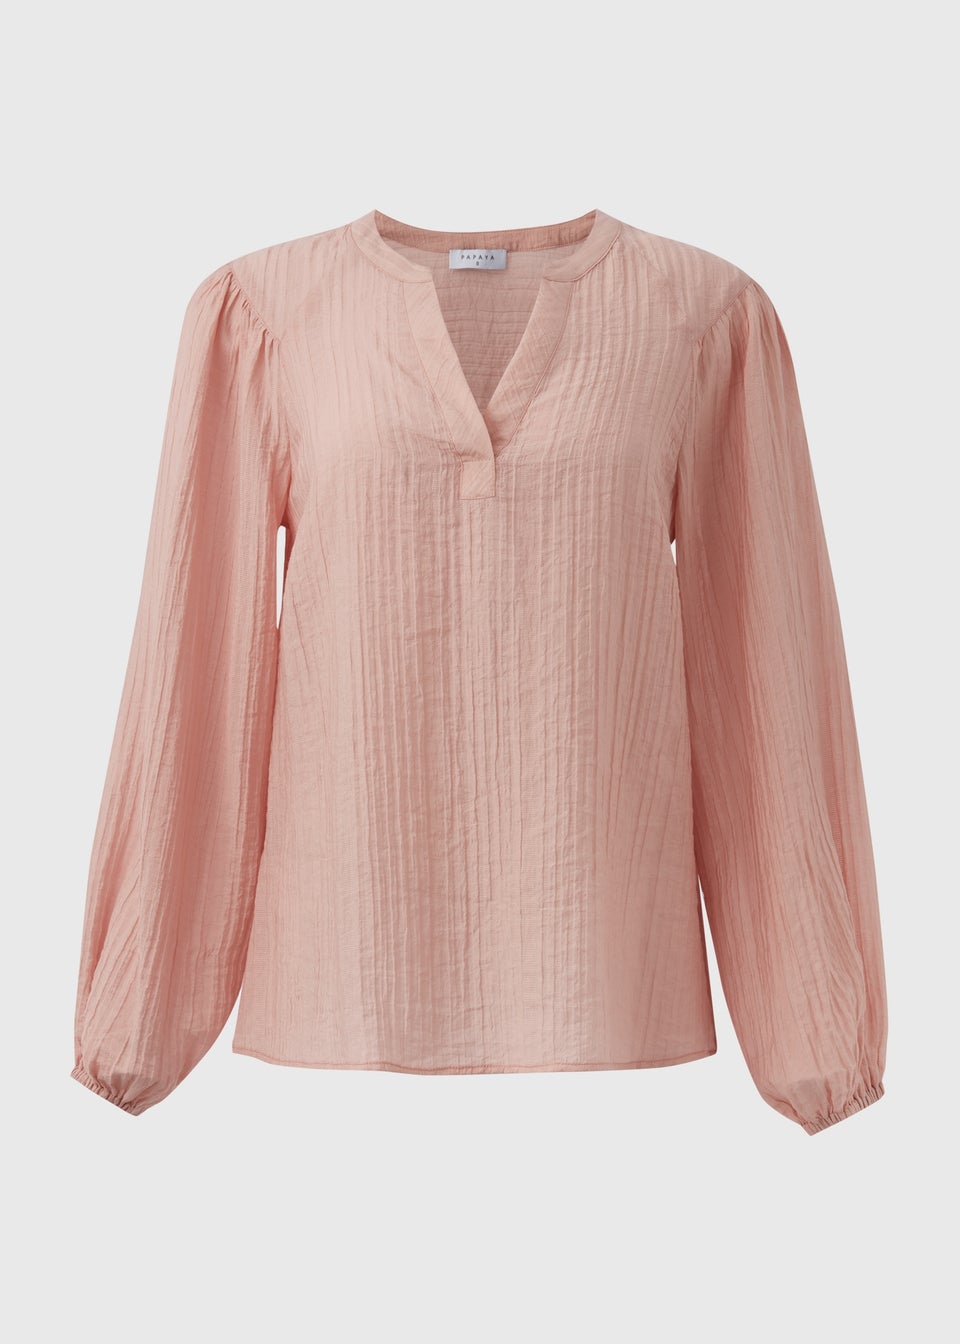 Pink Textured Blouse